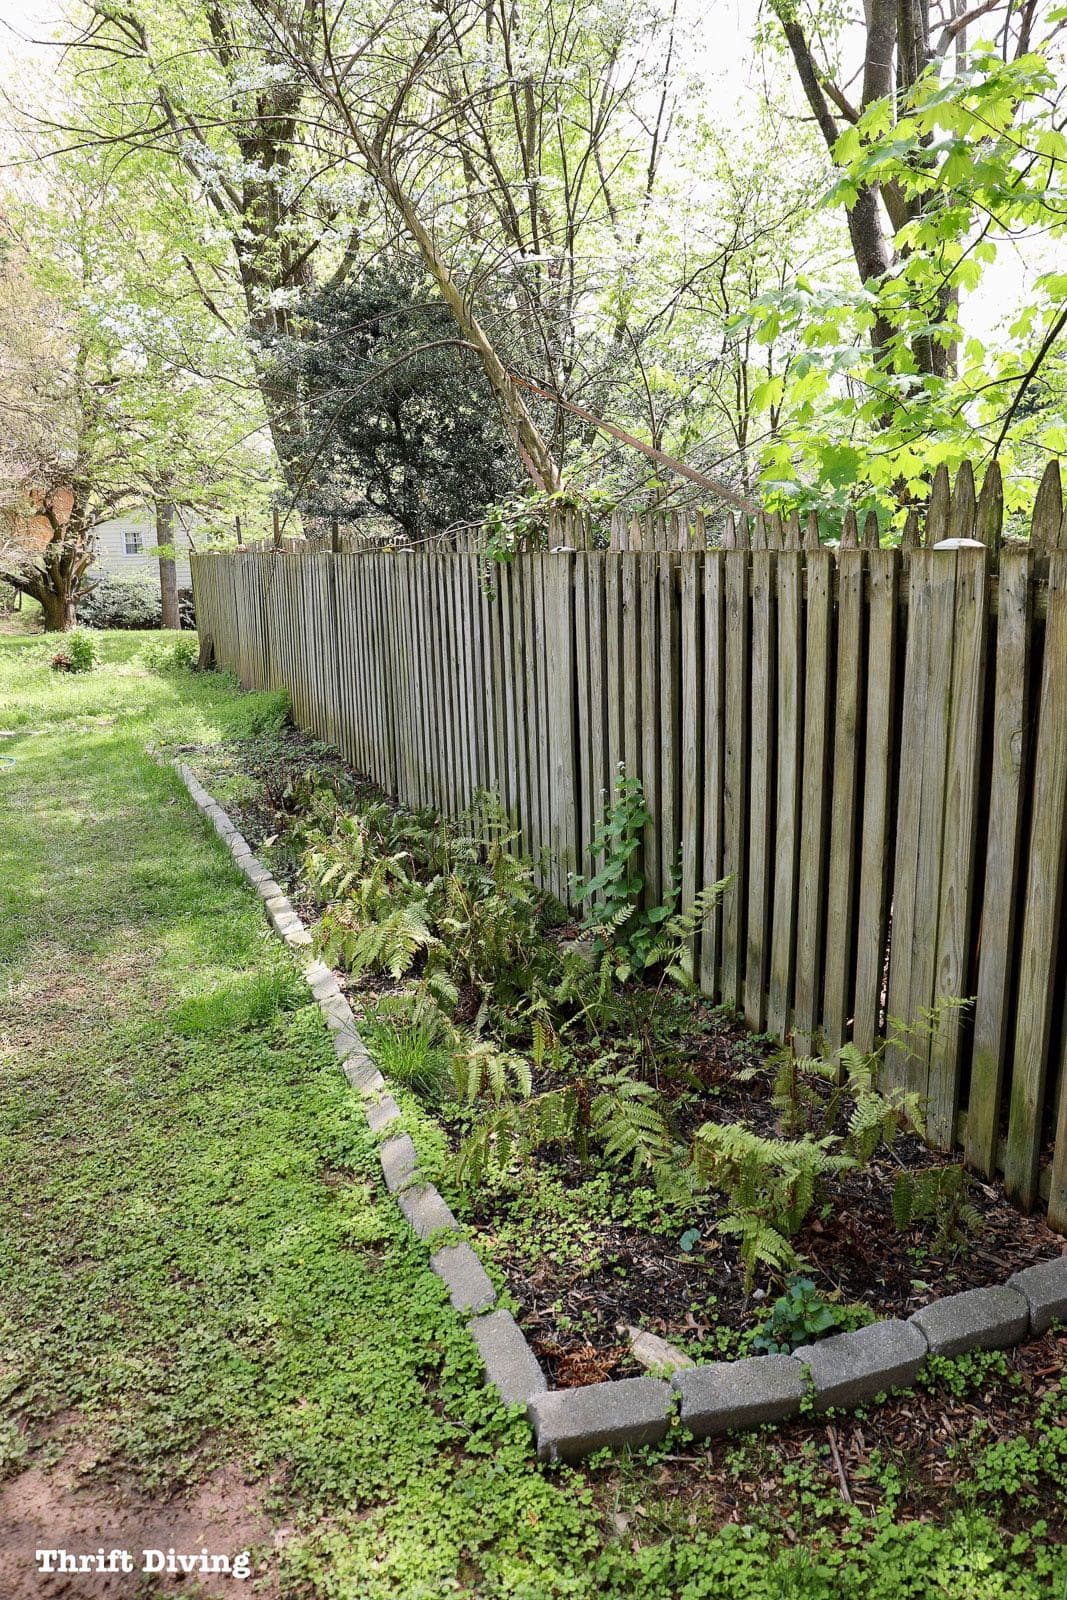 How to Use a Paint Sprayer to Paint a Wood Fence - BEFORE - See this ugly fence makeover! - Thrift Diving